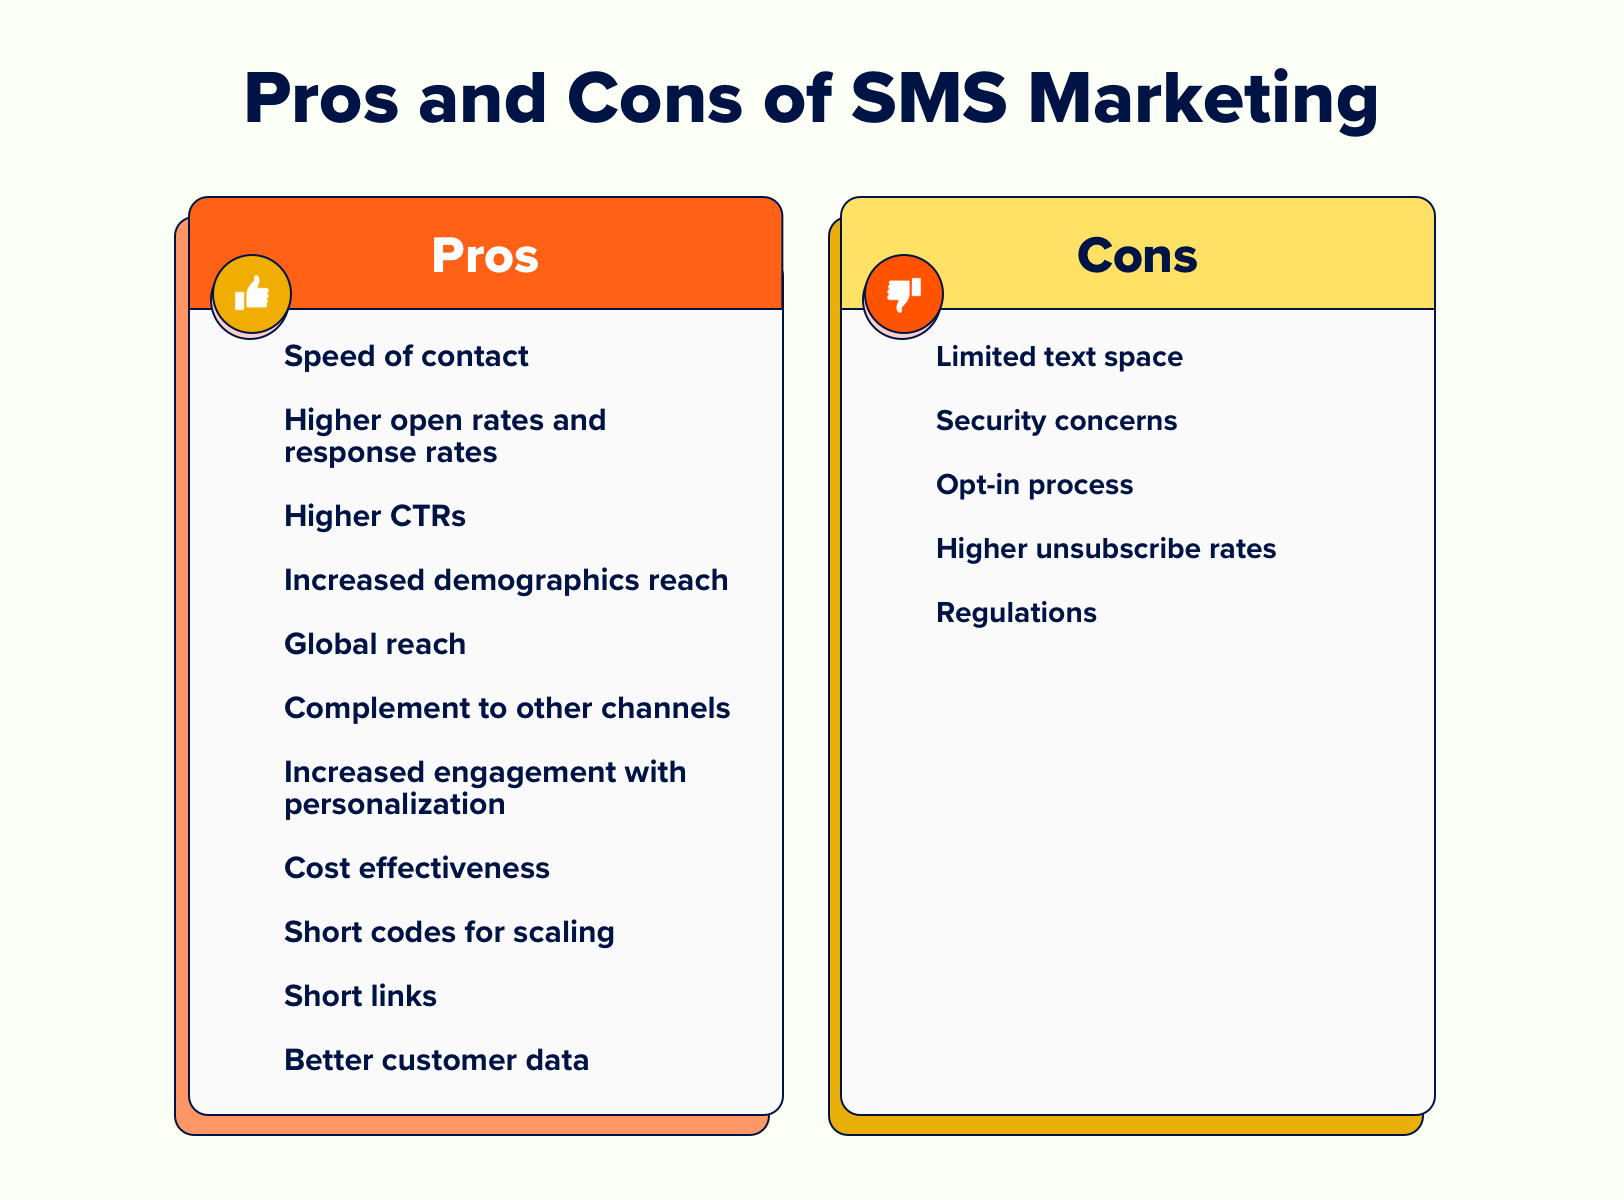 A pros and cons list of using SMS marketing.